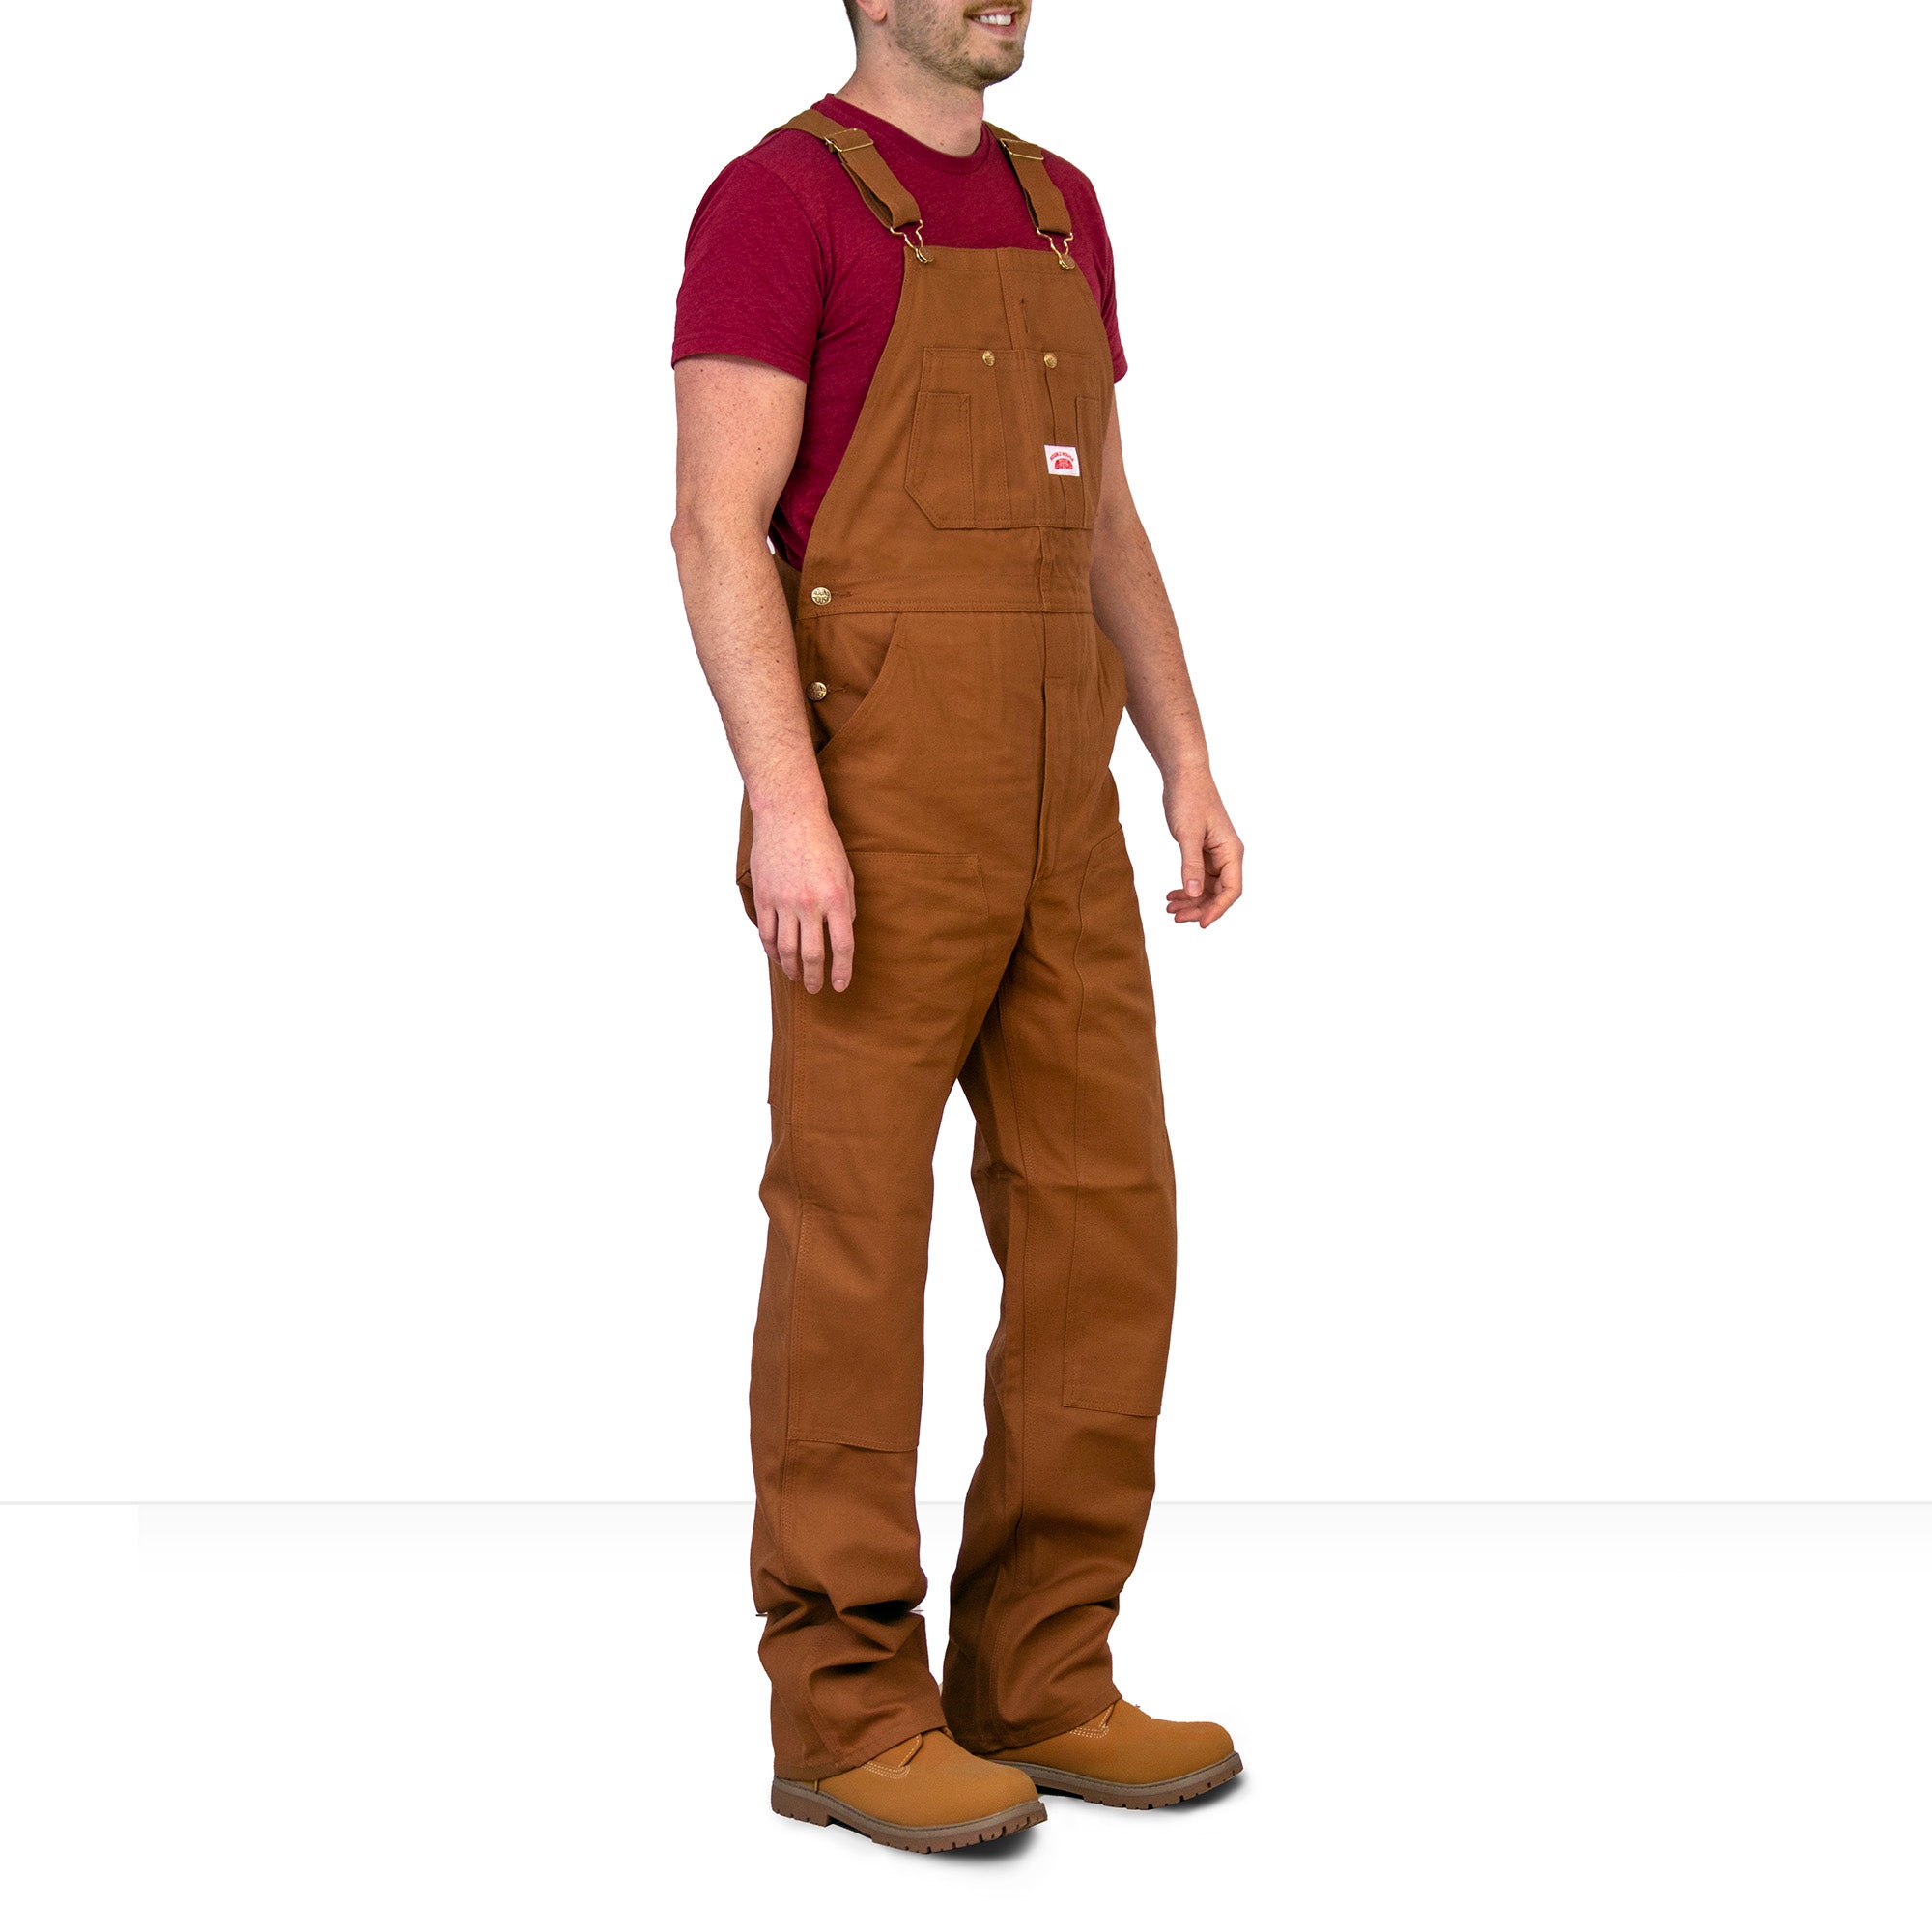 Round House Lot #83 Made in USA Men's Heavy Duty Brown Duck Bib Overalls 59.95 79.95